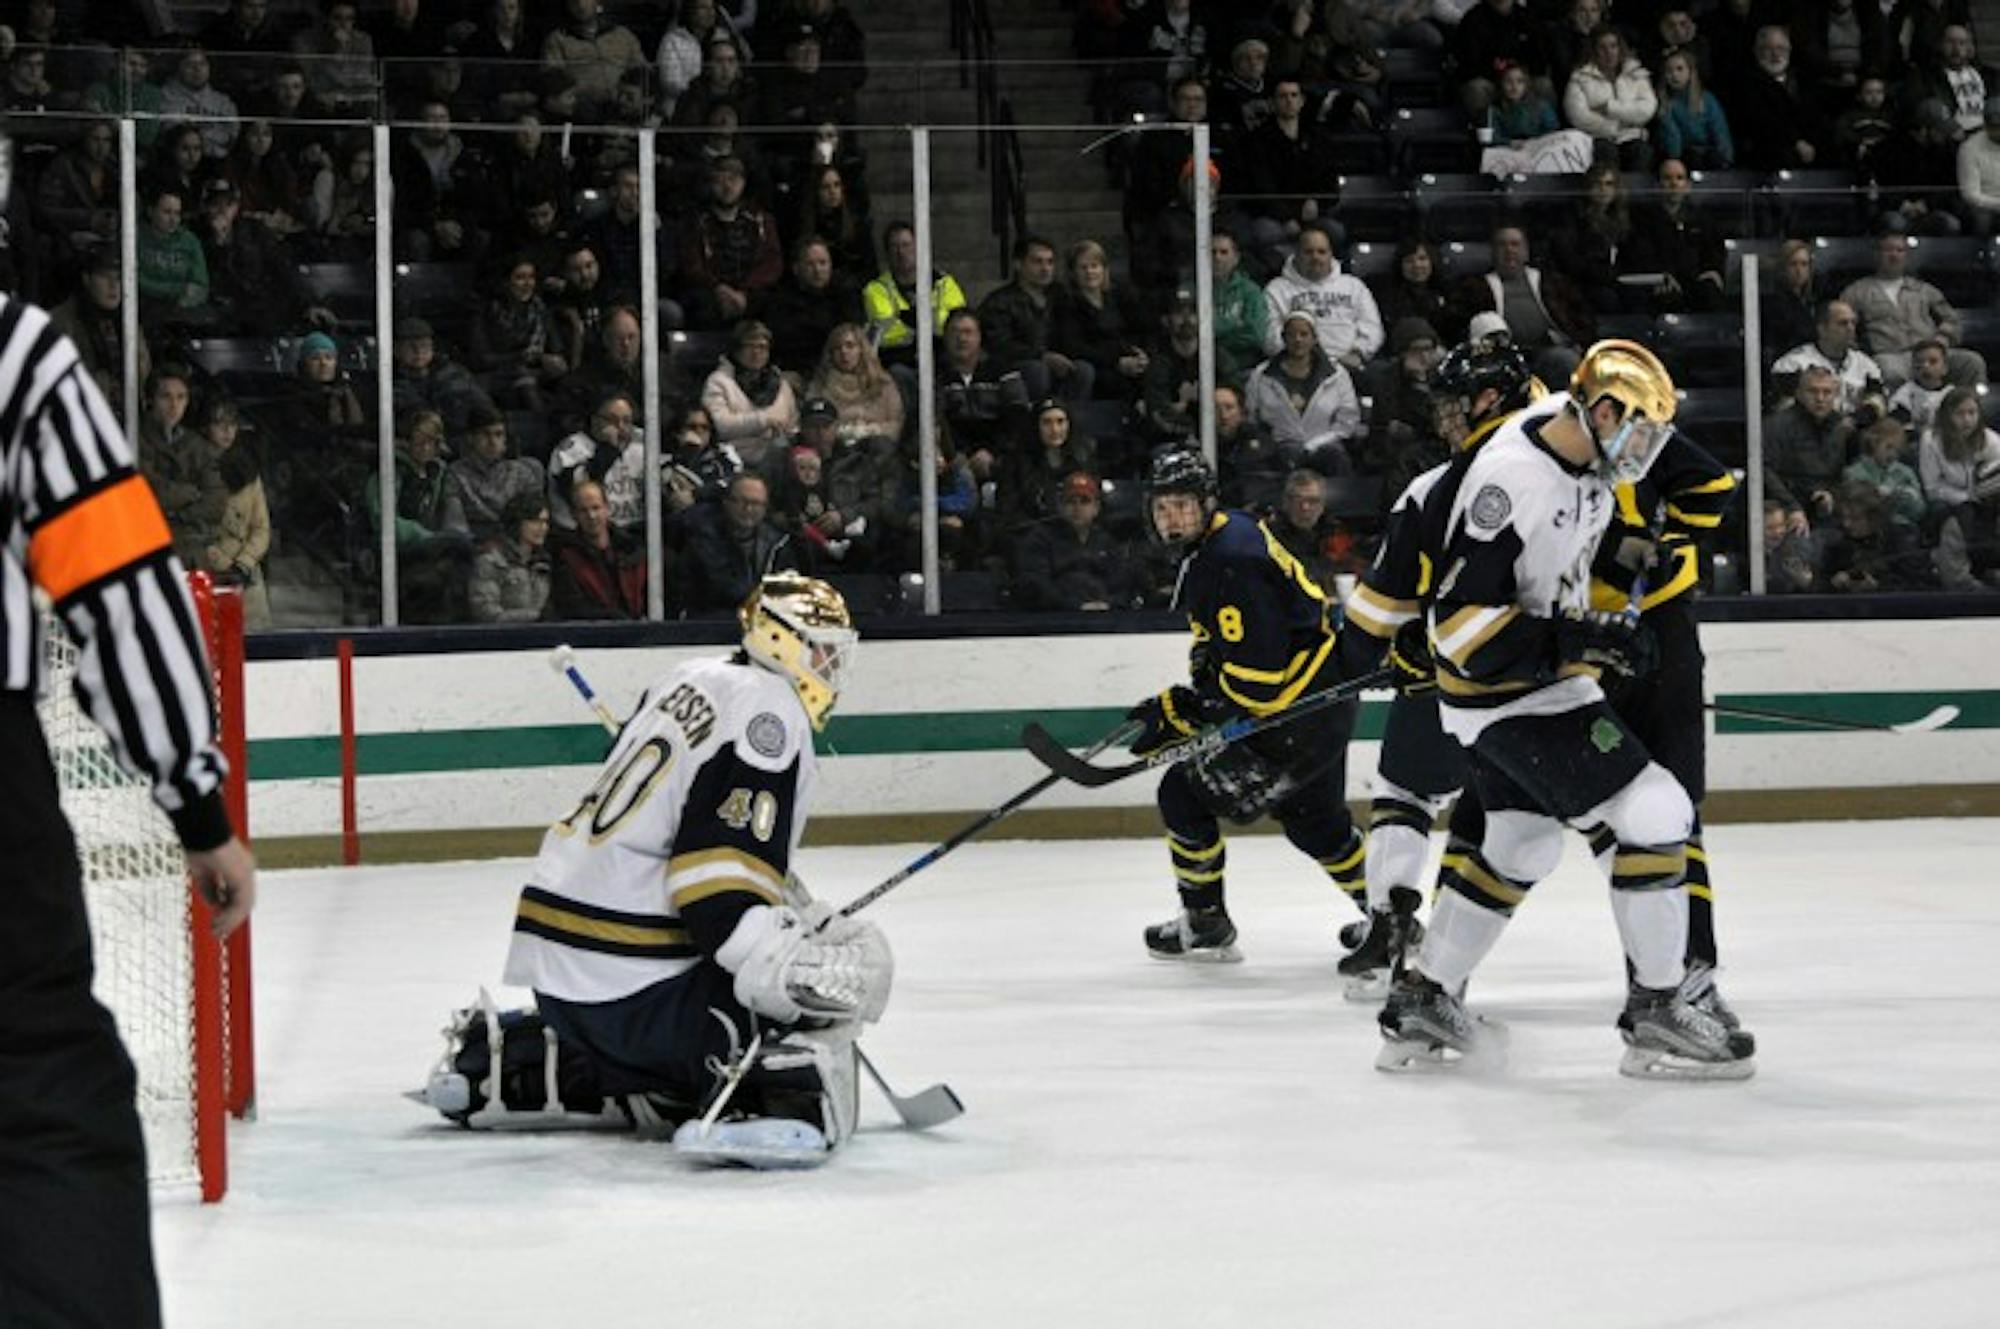 Irish sophomore goaltender Cal Petersen made 38 saves during Notre Dame's 3-1 win over Vermont on Saturday night.